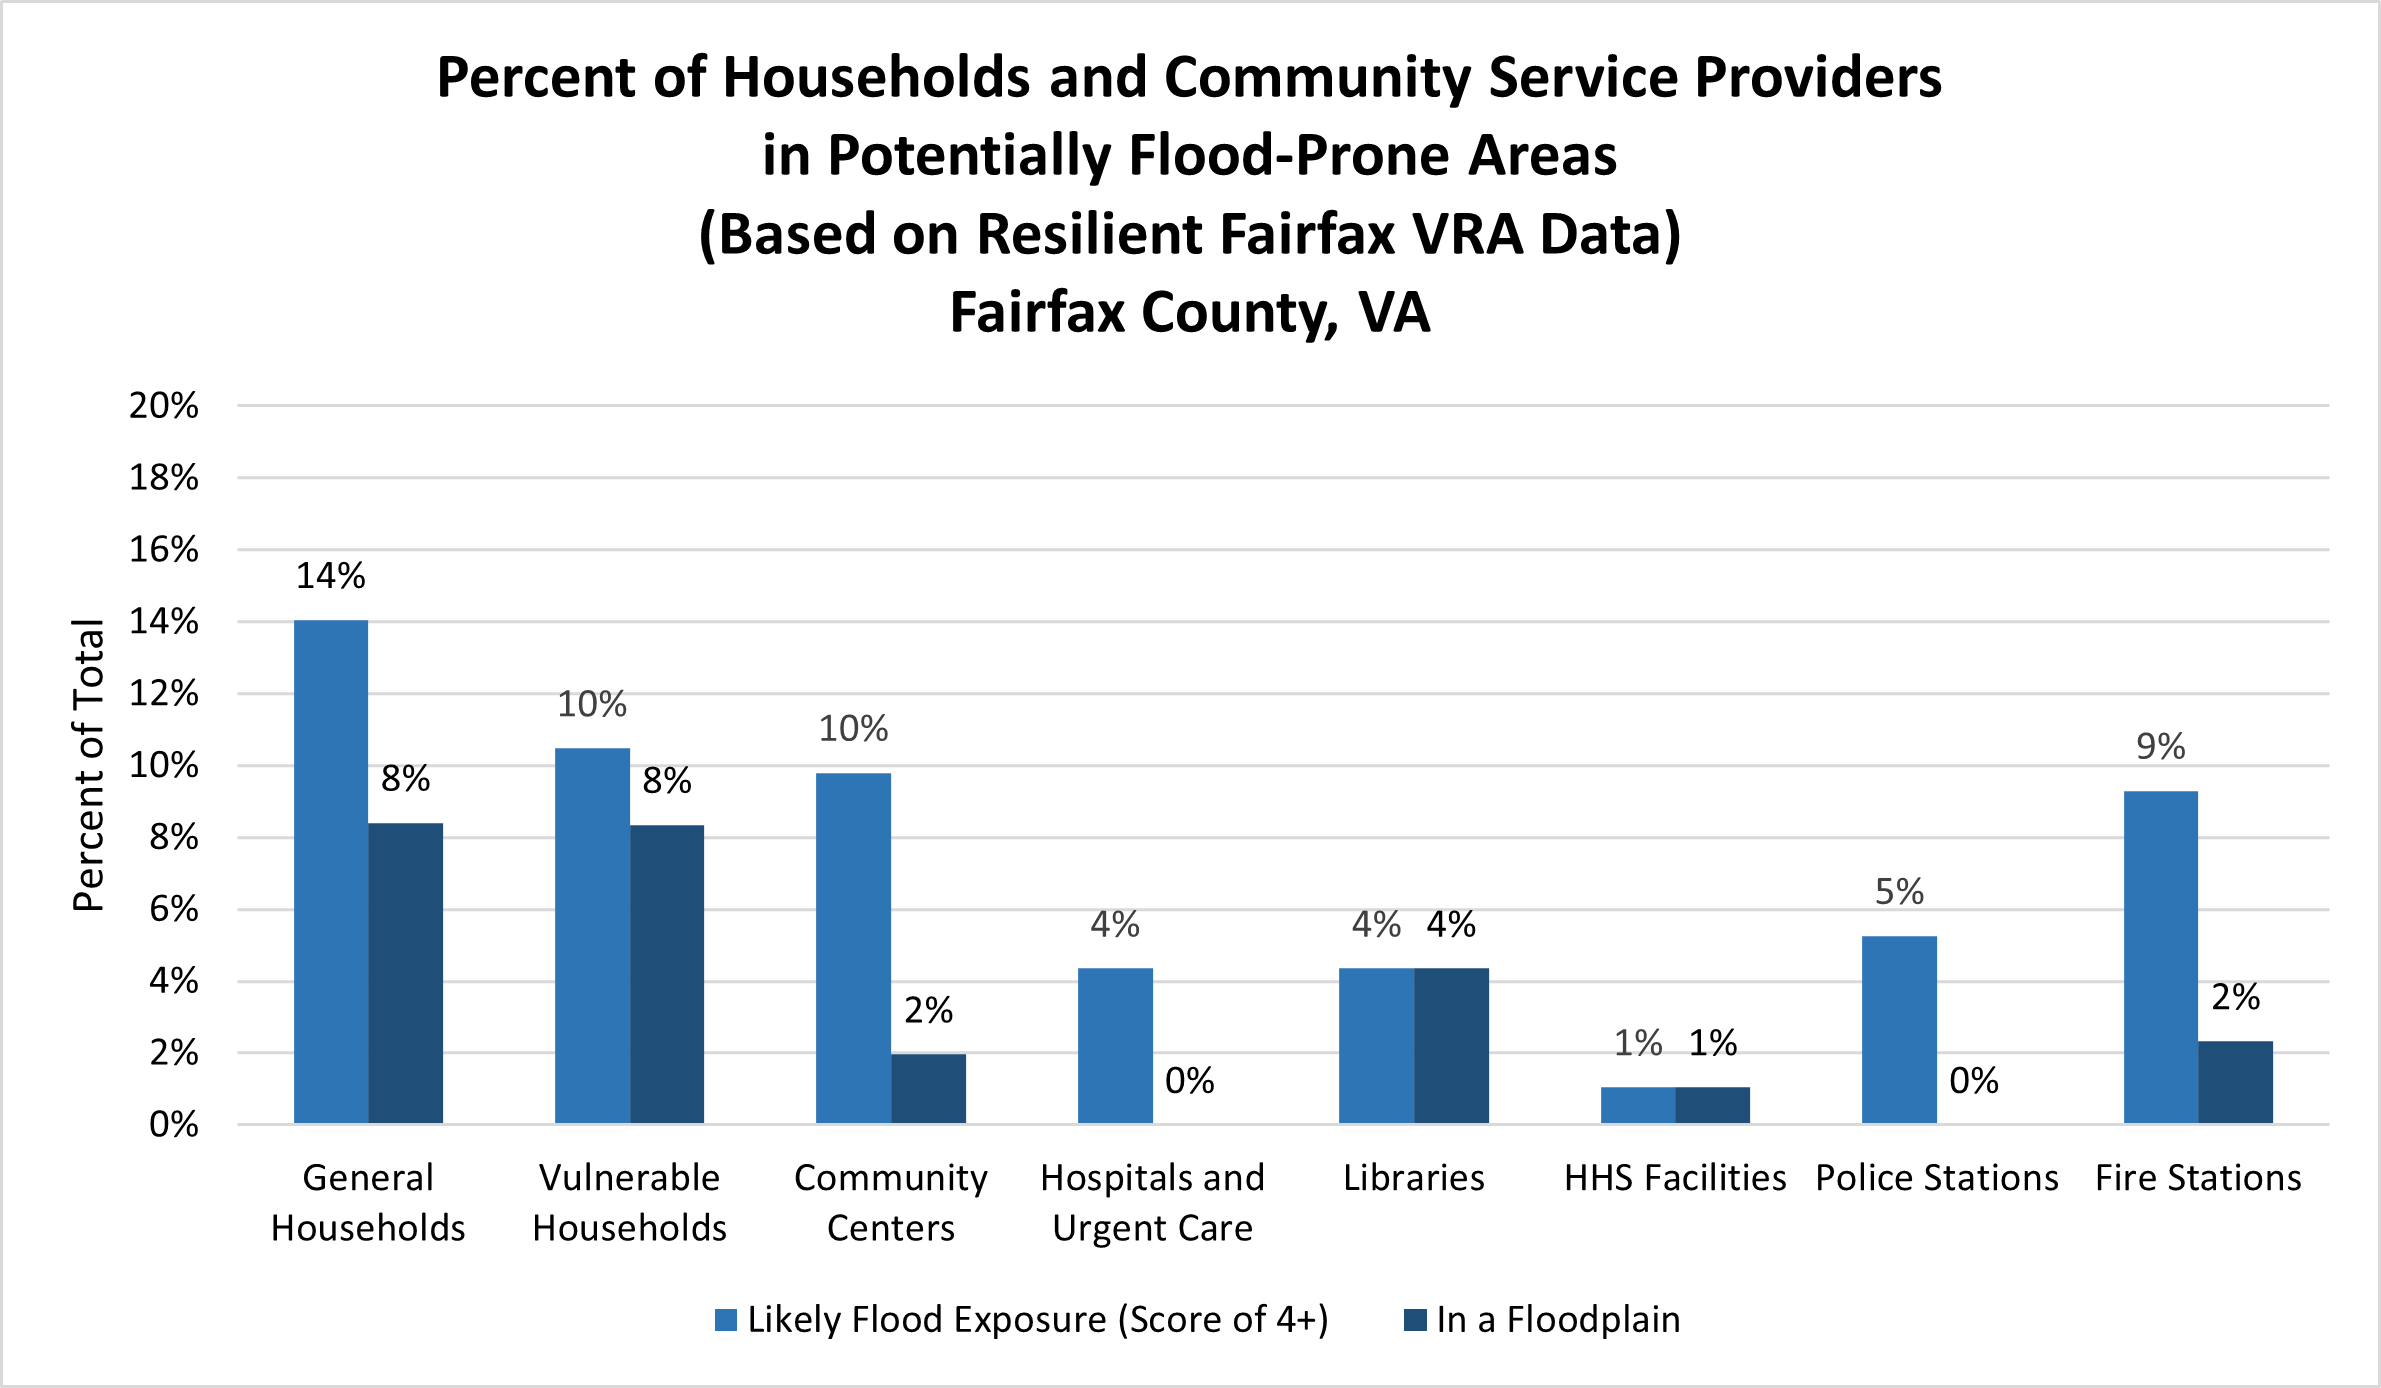 Percent of Households and Community Service Providers in Potentially Flood-Prone Areas (Based on Resilient Fairfax VRA Data) Fairfax County, VA